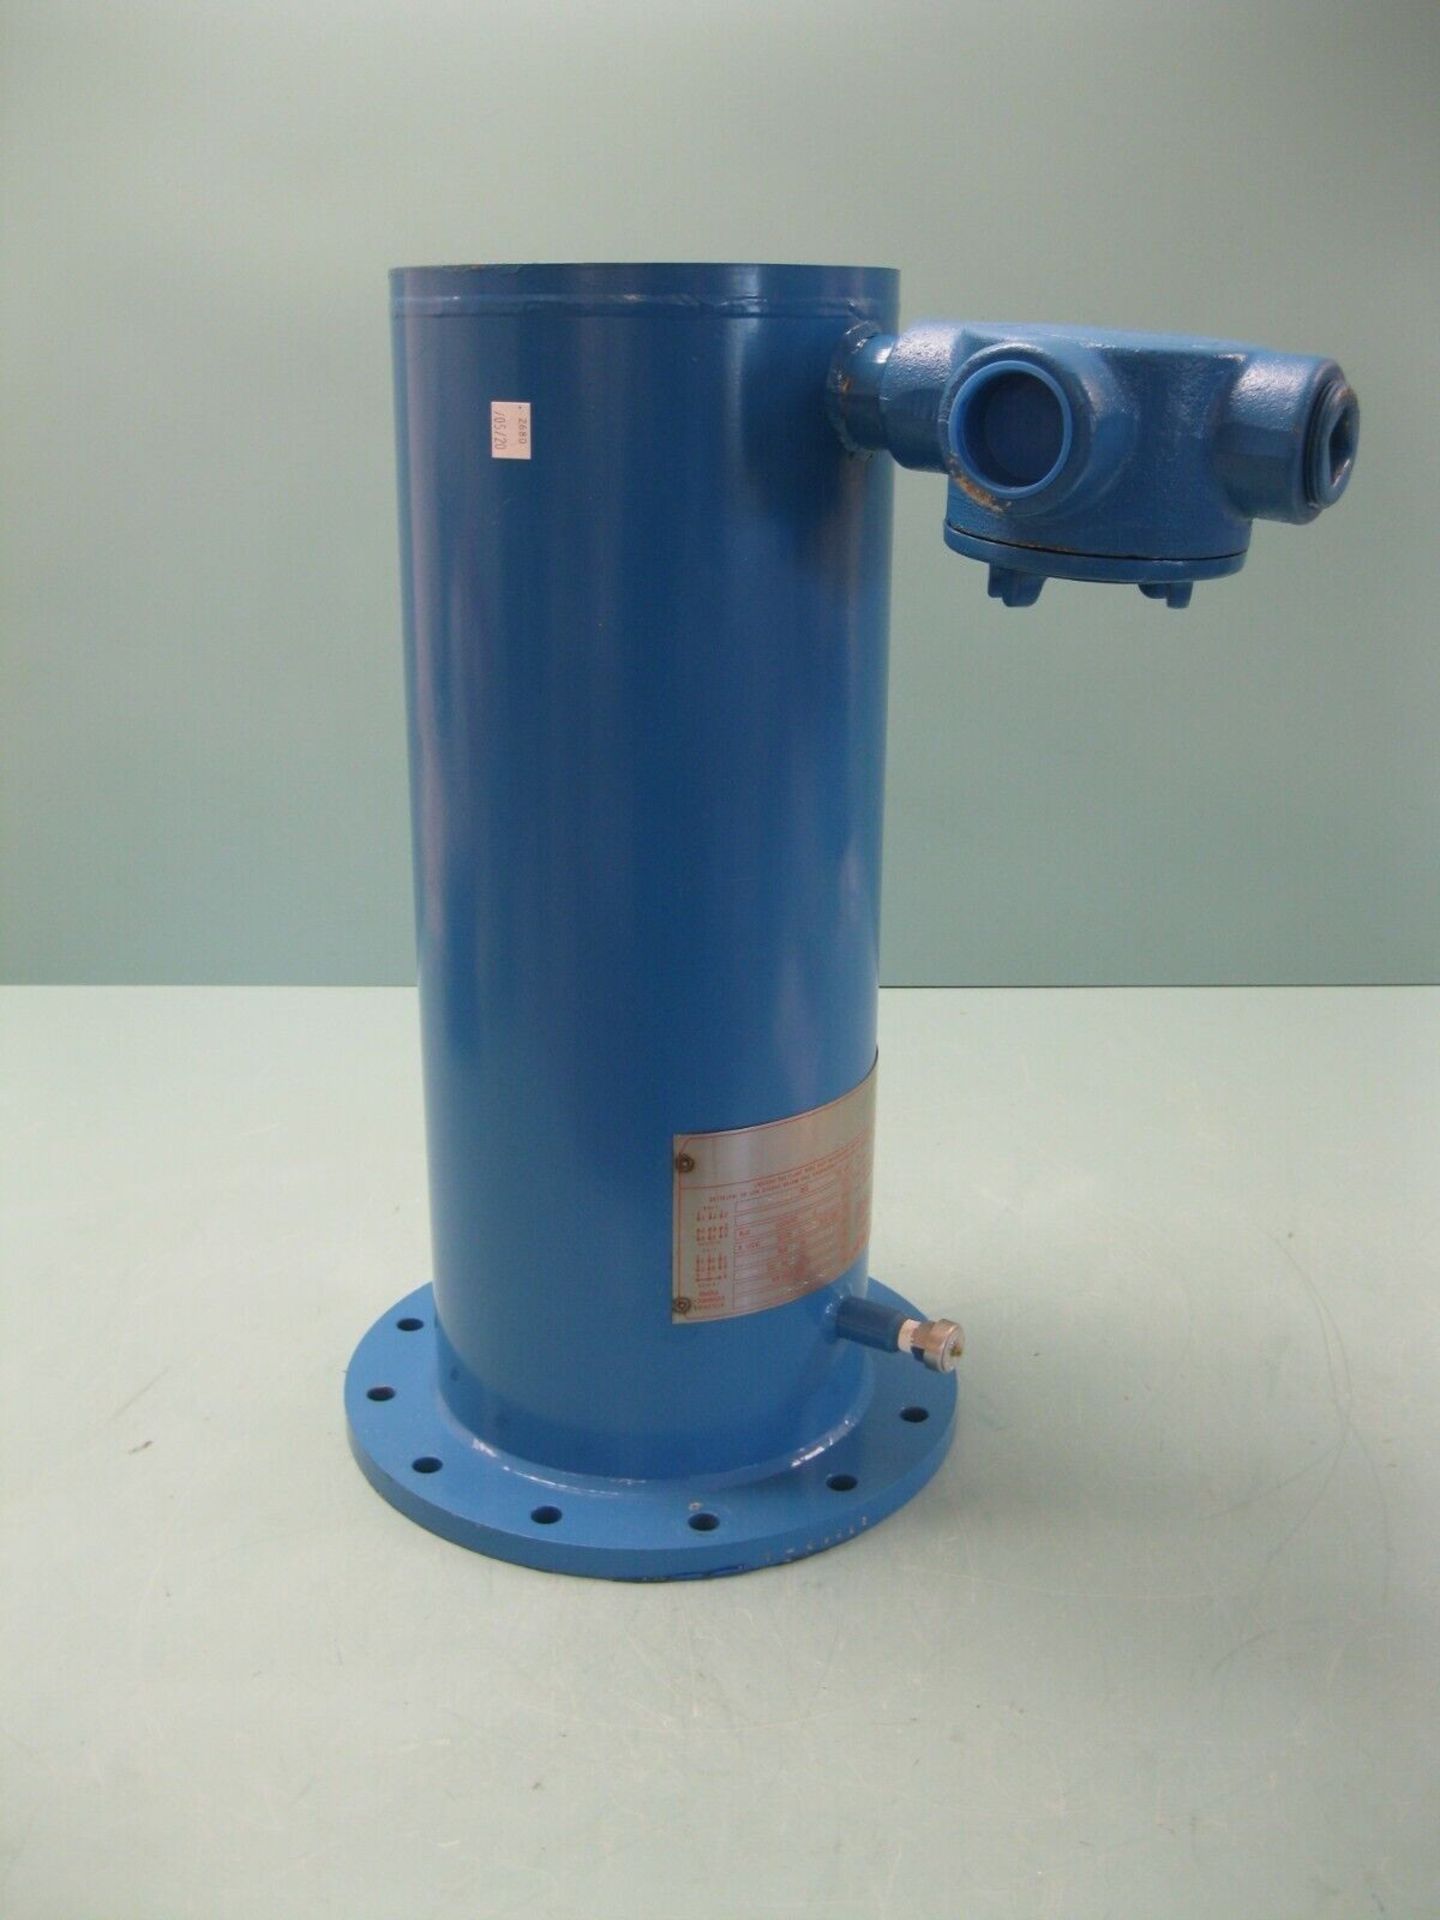 Lot of (3) Crane Chempump GE-20K Seal-Less Pump Housing NEW (Located Springfield, NH) (Loading - Image 4 of 8